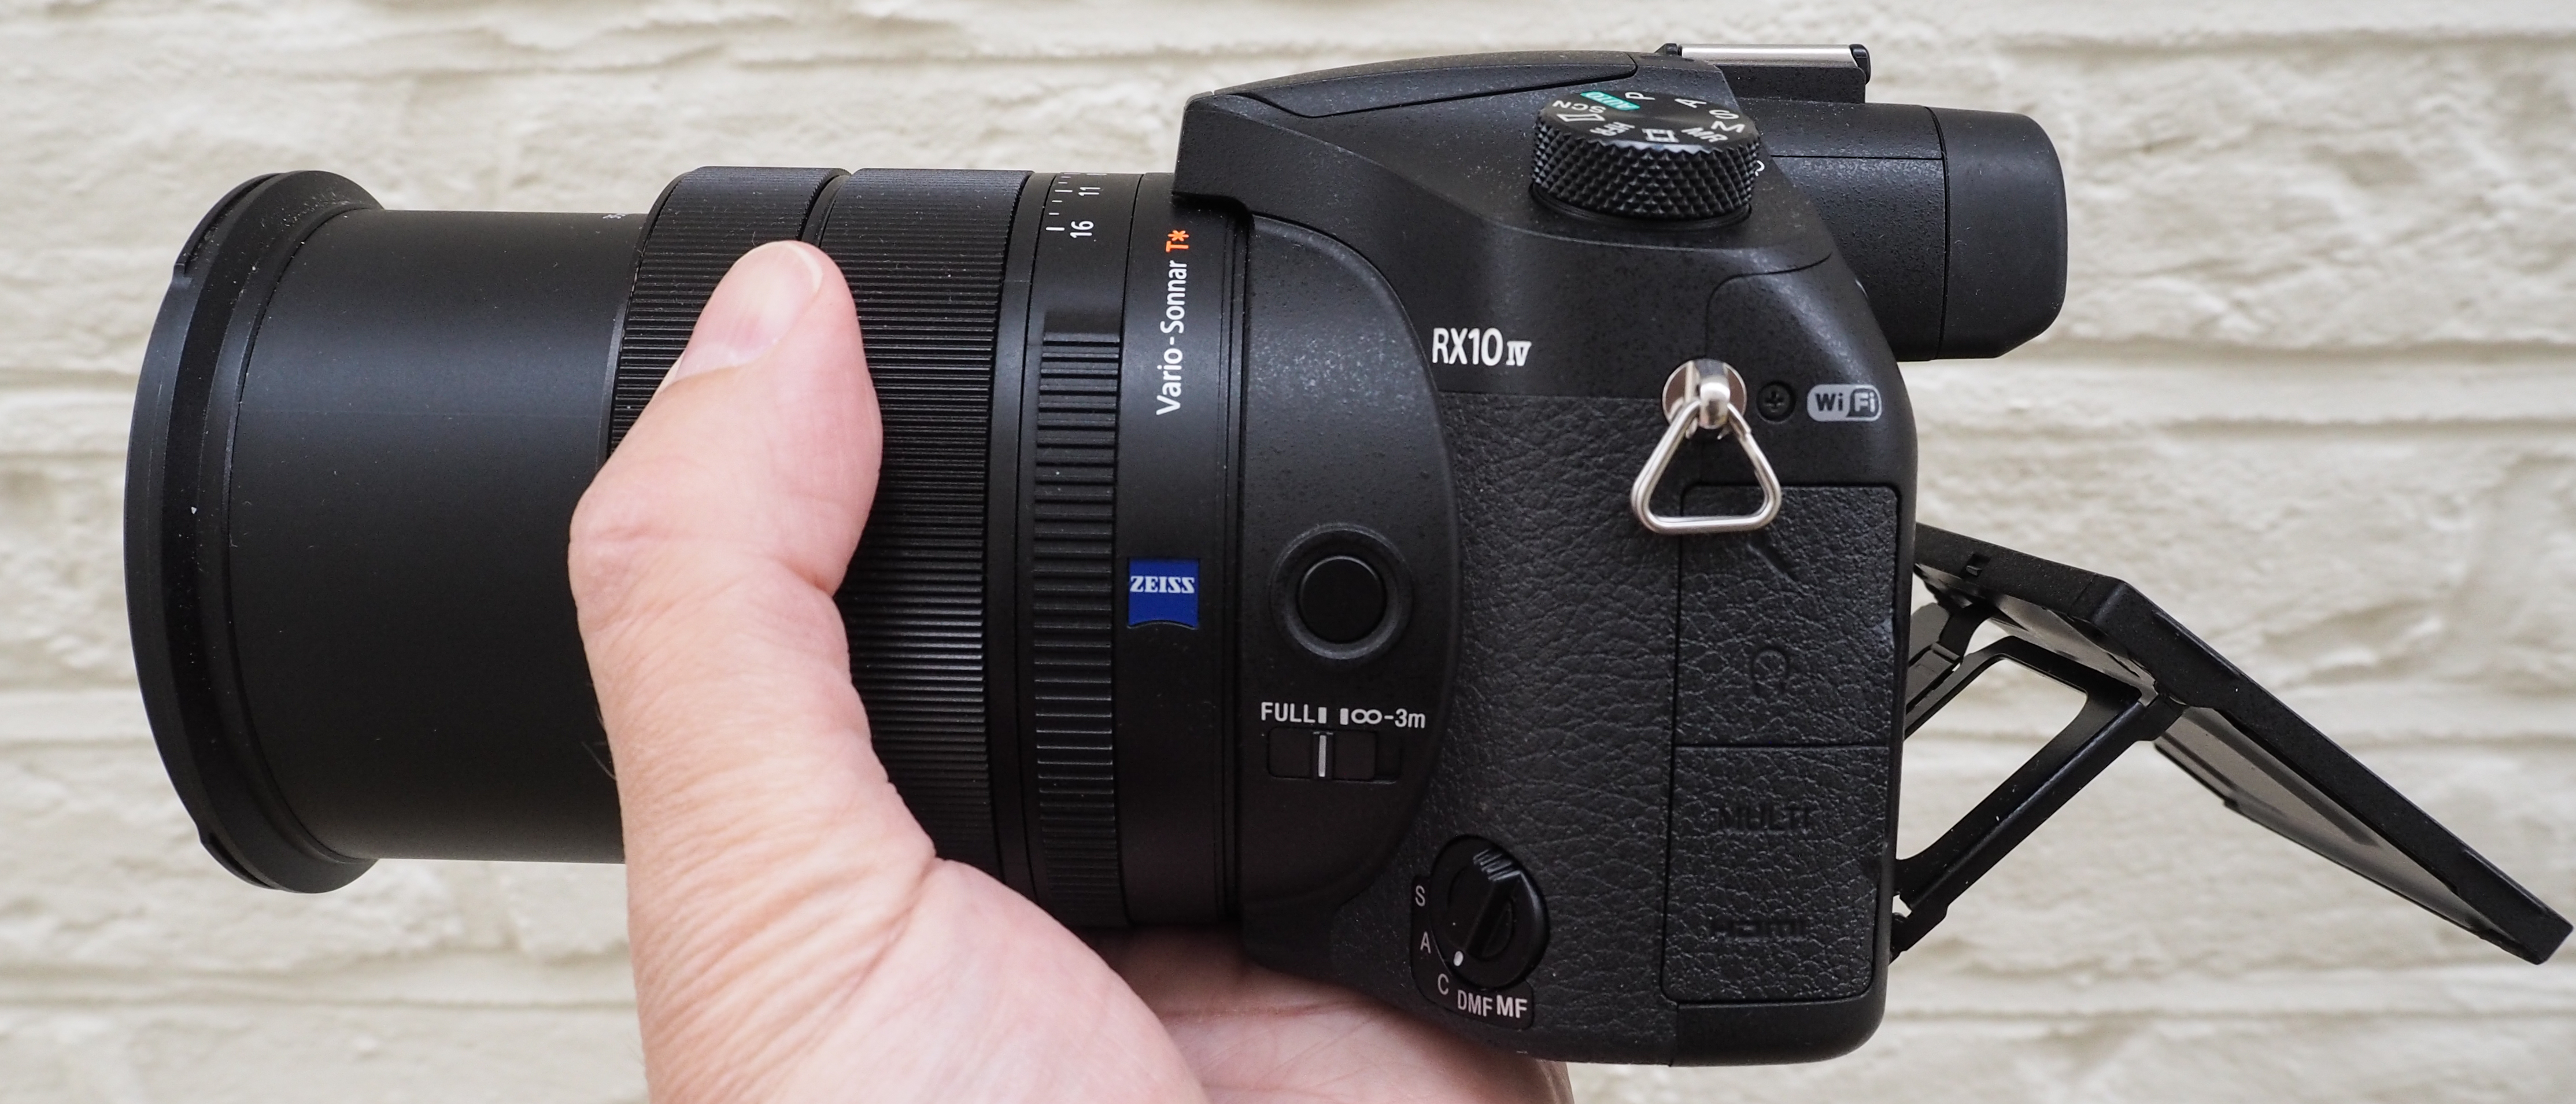 First Hands-On Impressions of the Sony RX10 IV, the All-In-One Bridge  Camera With 24 fps Stills Shooting